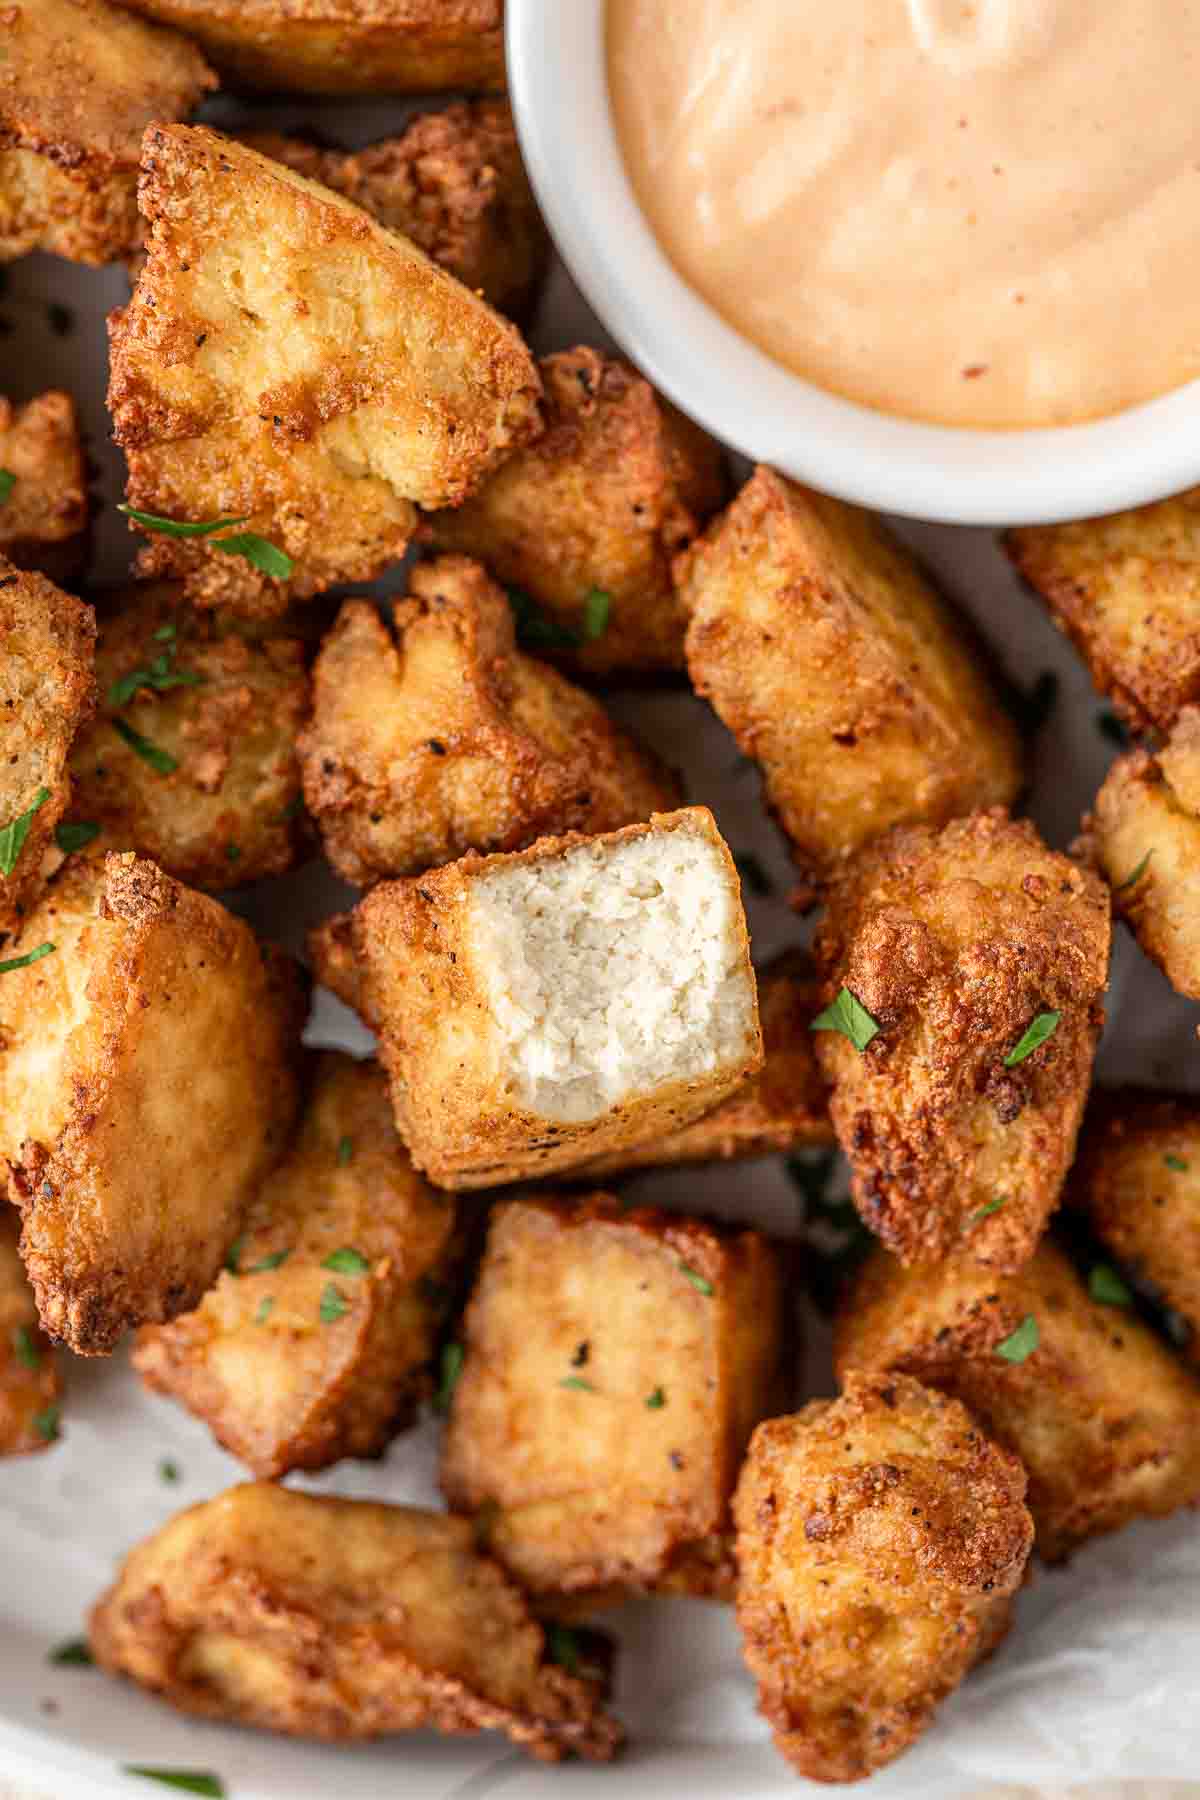 Close up of air fryer tofu nuggets, one with a bite taken revealing the inside.